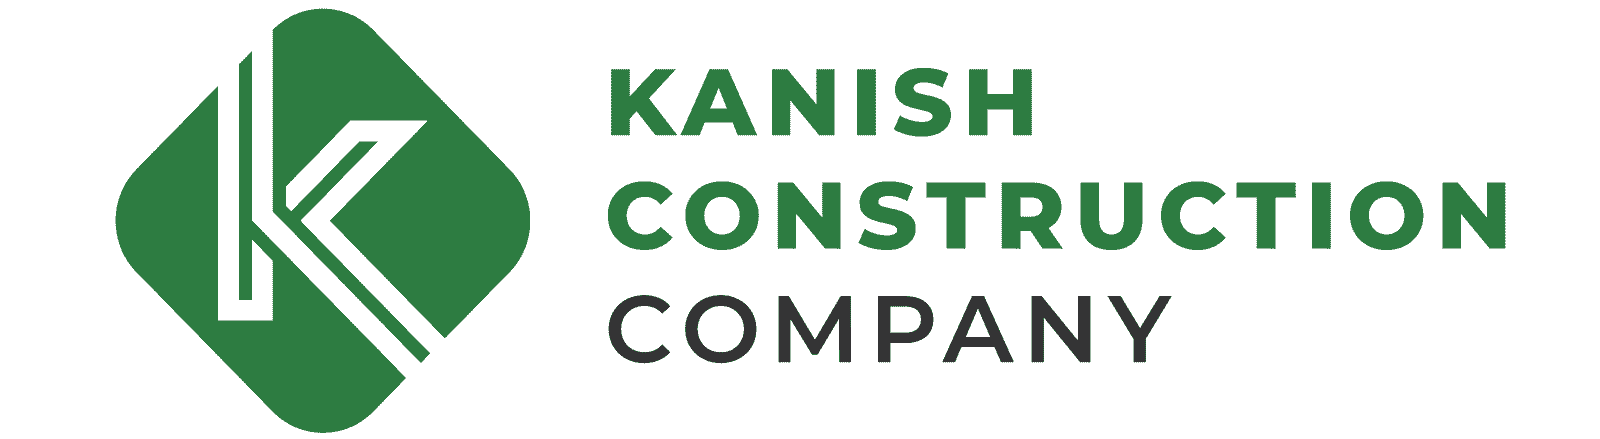 Kanish Construction Company | Realestate developer and Home Builder in Coimbatore | Individual Villas | Apartments | Gated Communities